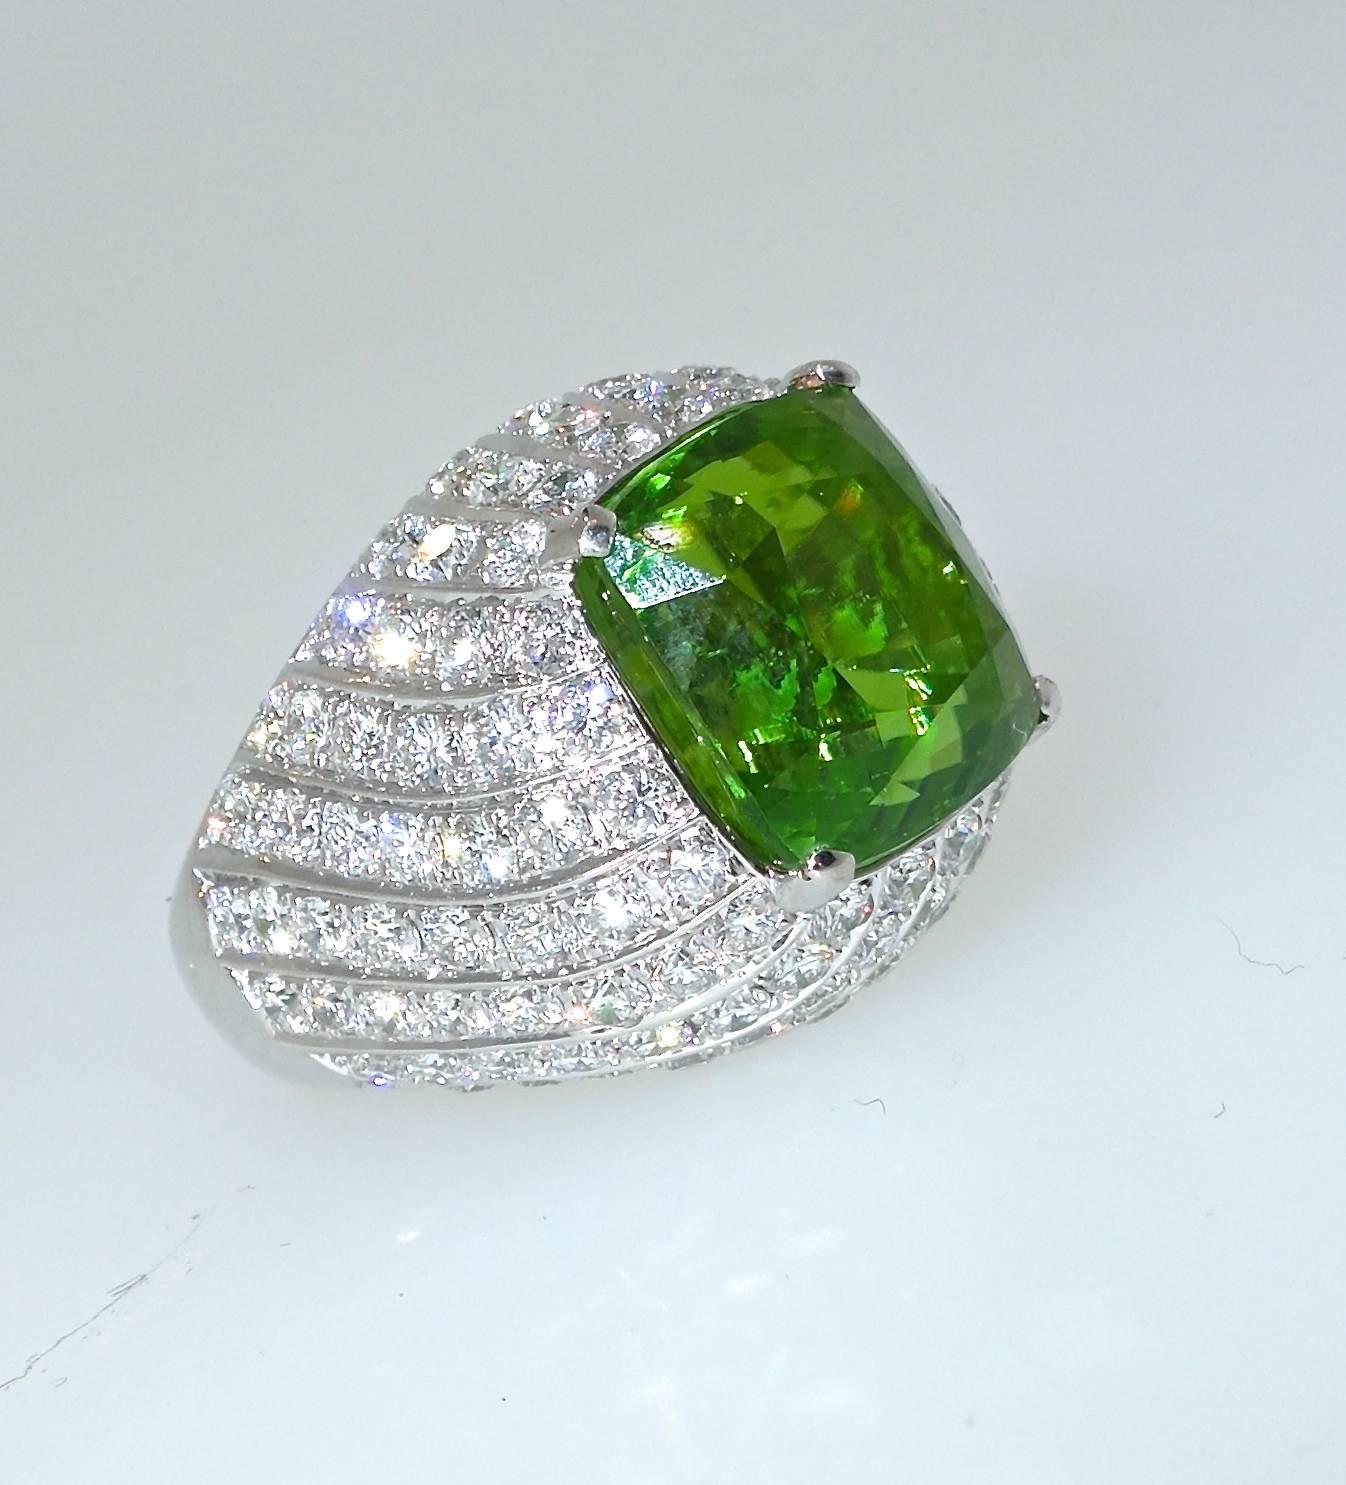 The center fine natural peridot displays a bright green color with no undertones of brown.  The stone weighs 11.7 cts and is clean and well cut.  In a swirl design leading up to the peridot are approximately 3.63 cts of fine white diamonds all near